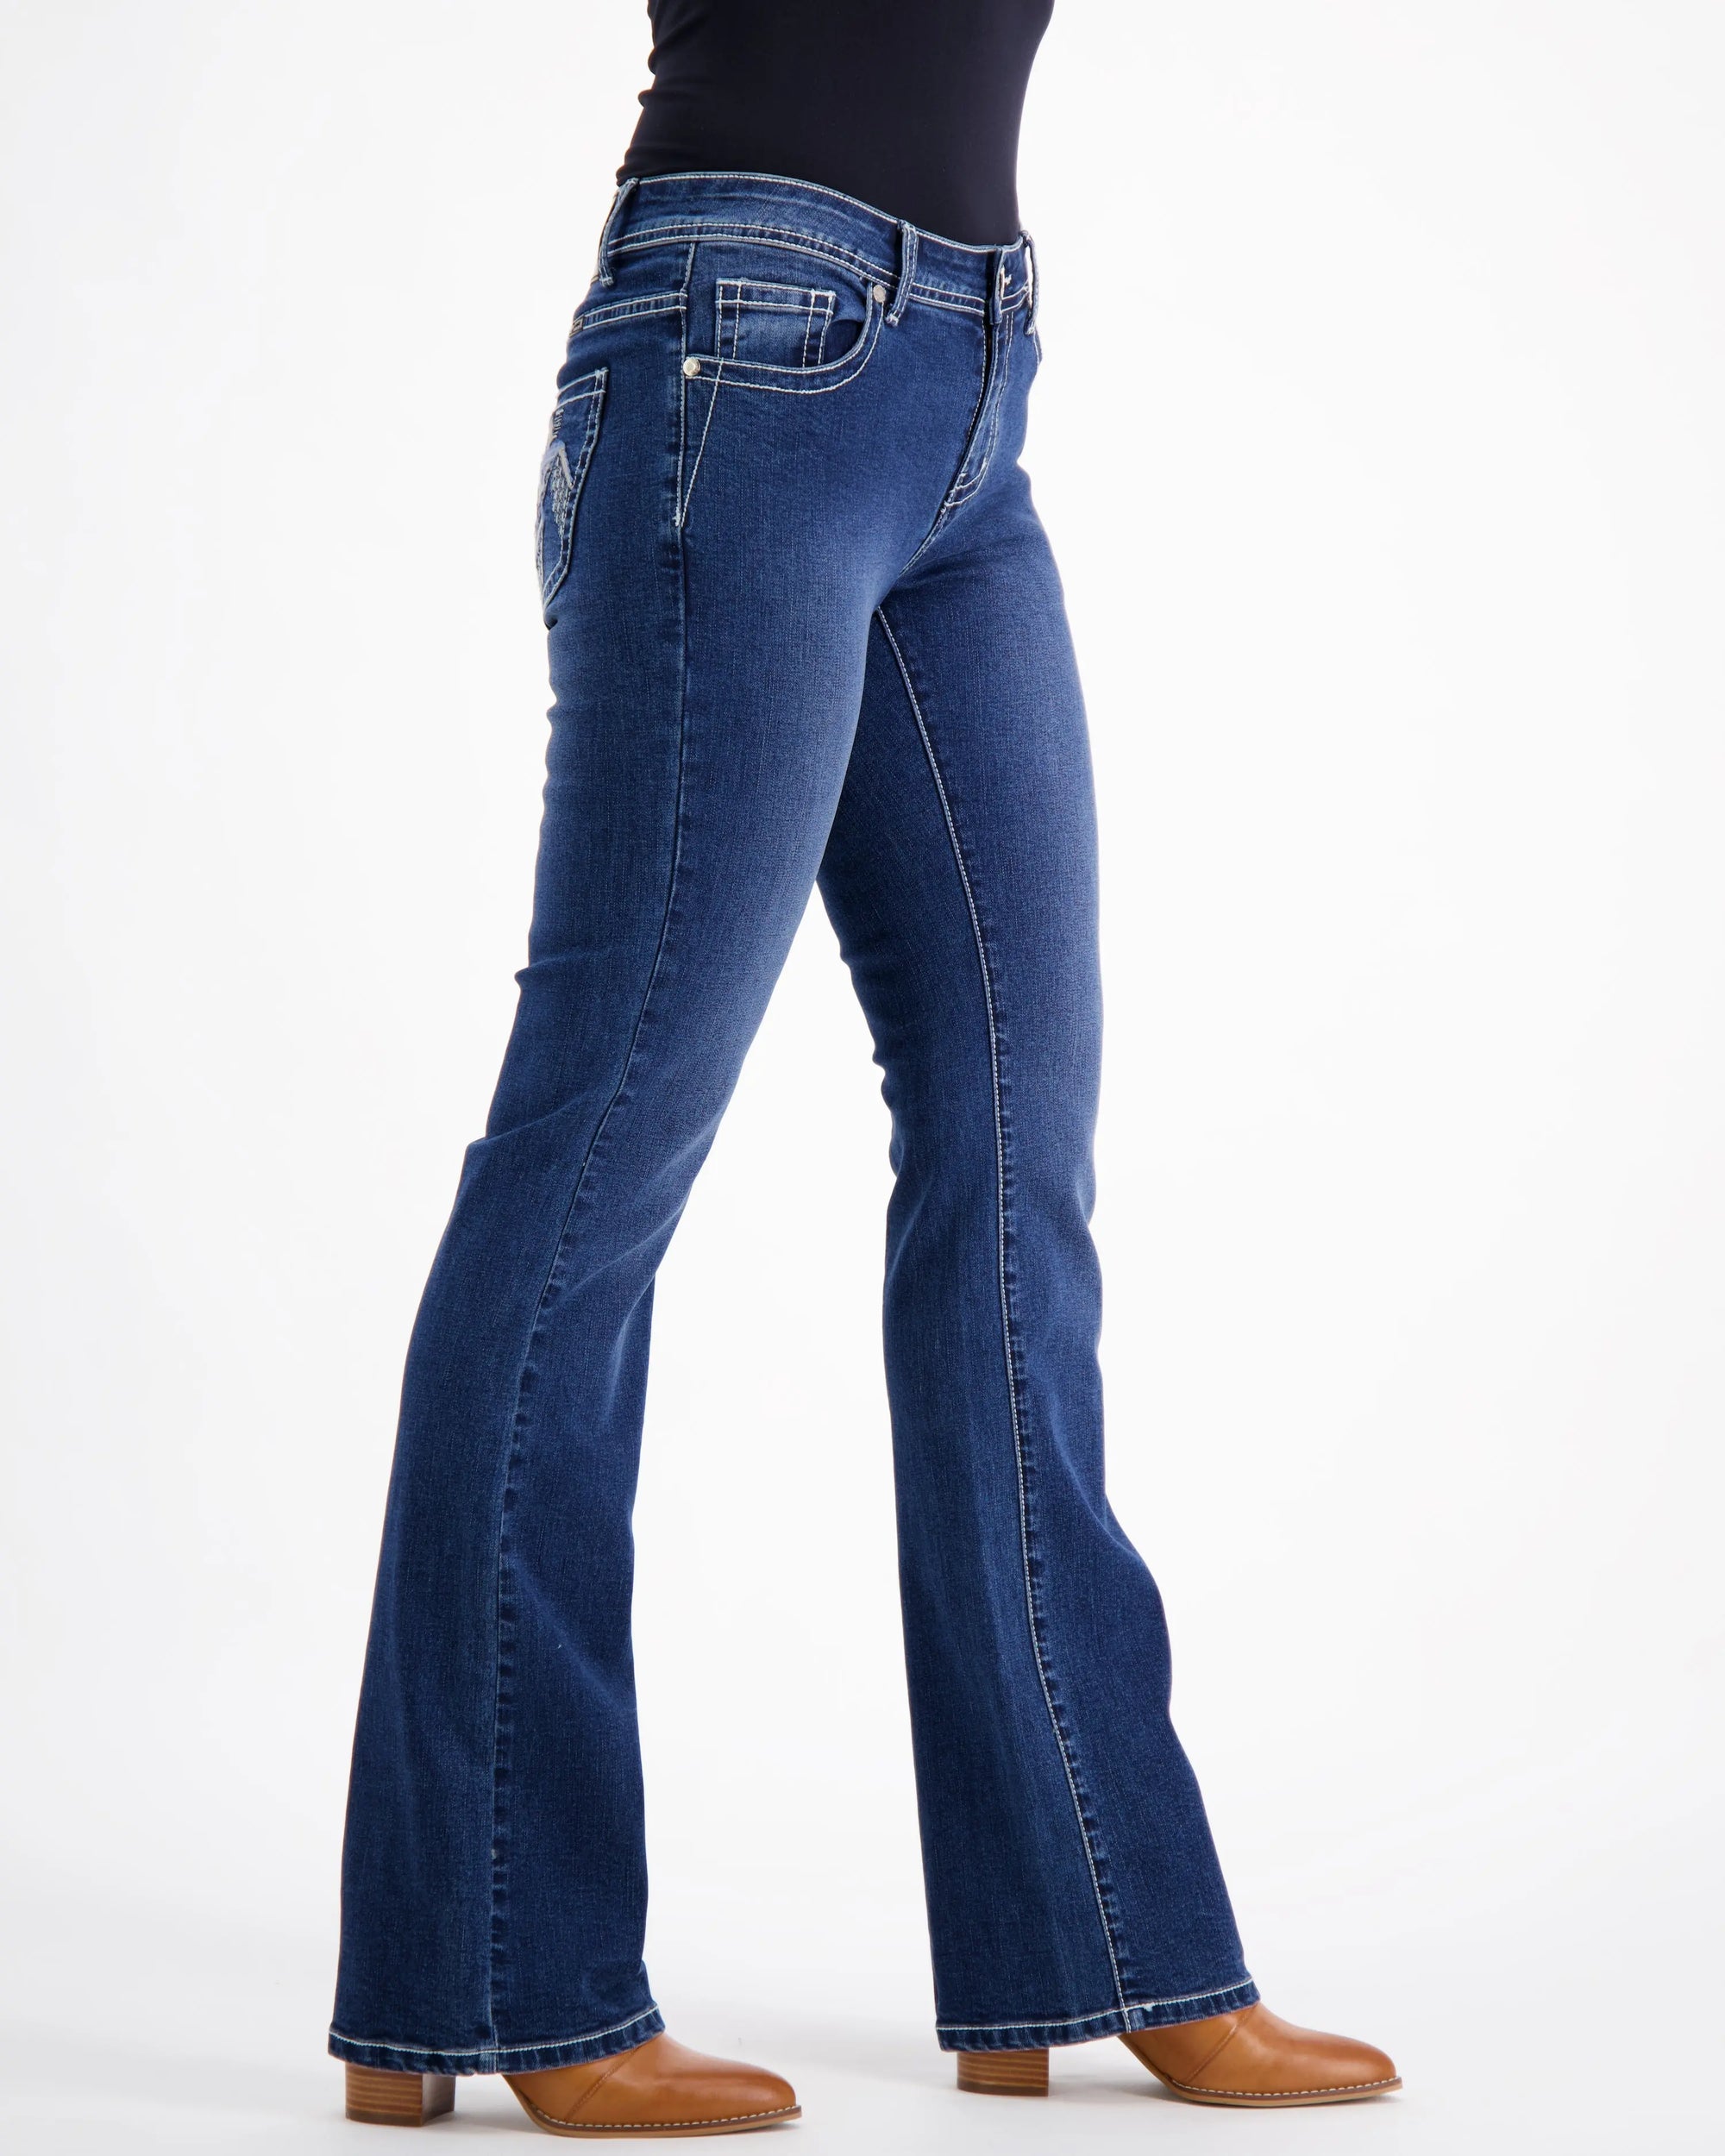 Rodeo style Western Denim Jeans